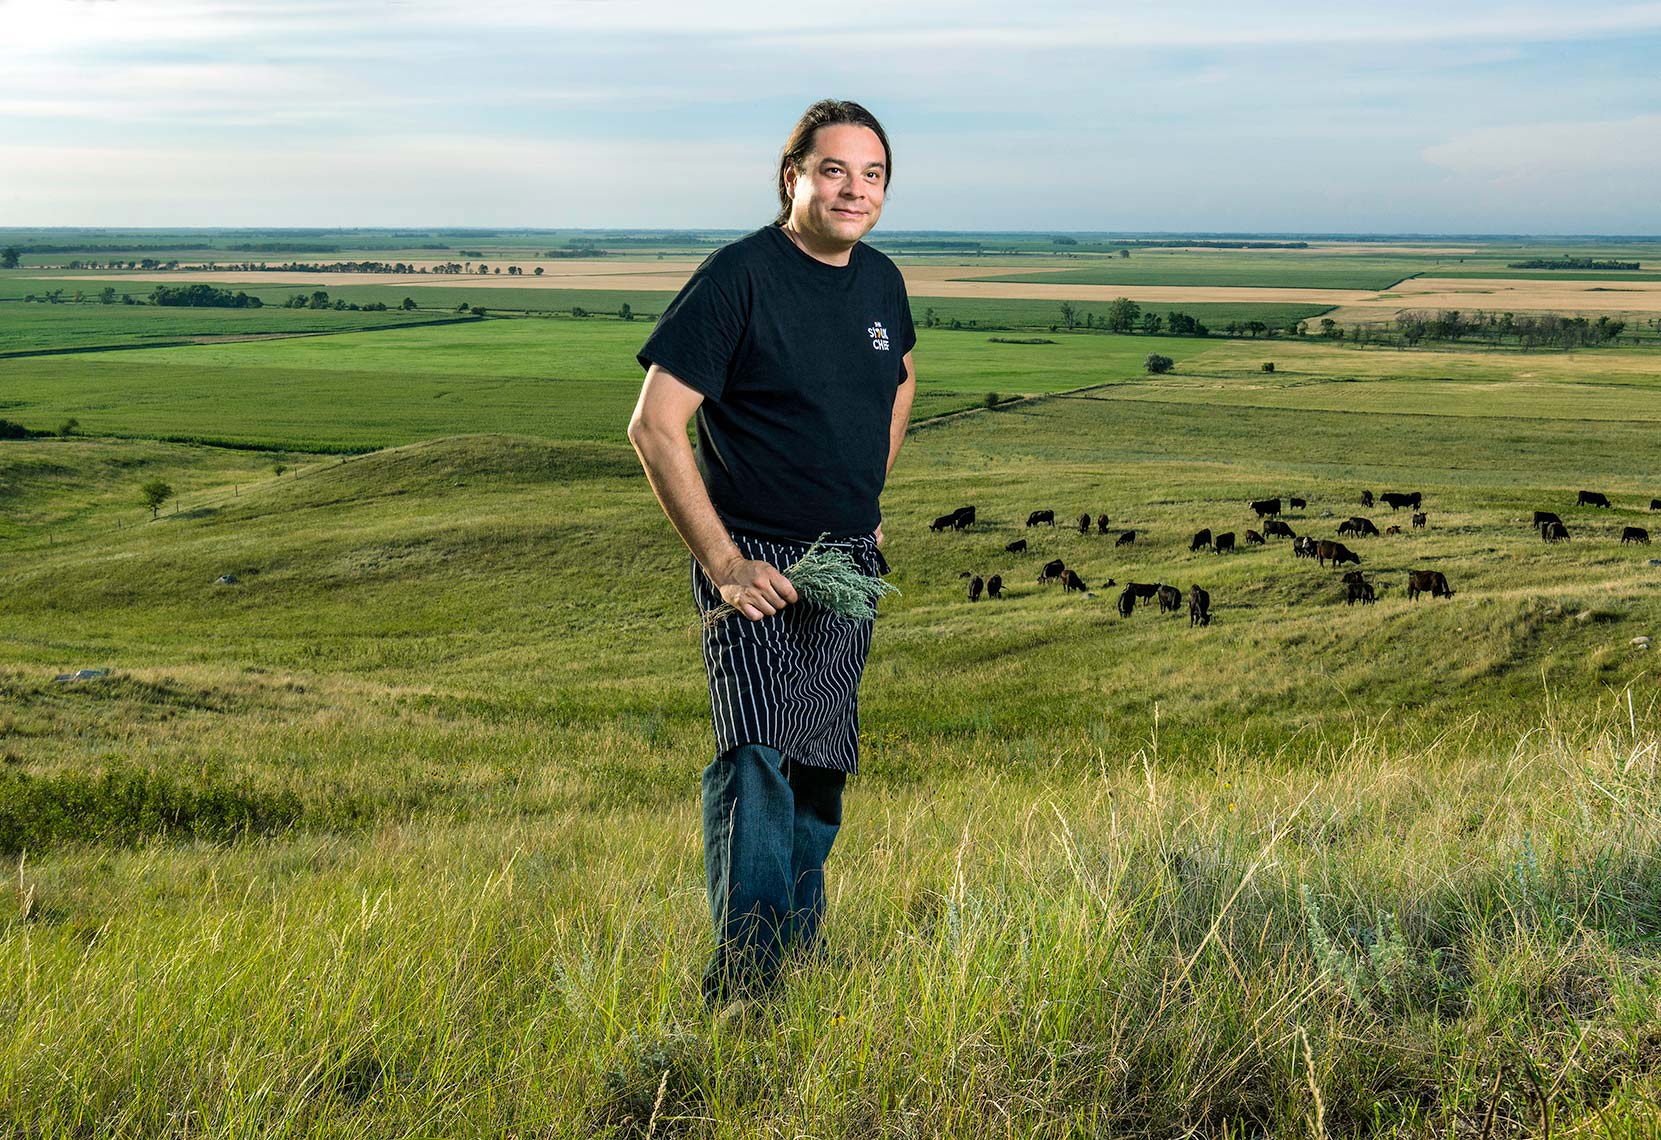 Sean Sherman, The Sioux Chef, photographed on location by North Dakota editorial photographer Dan Koeck